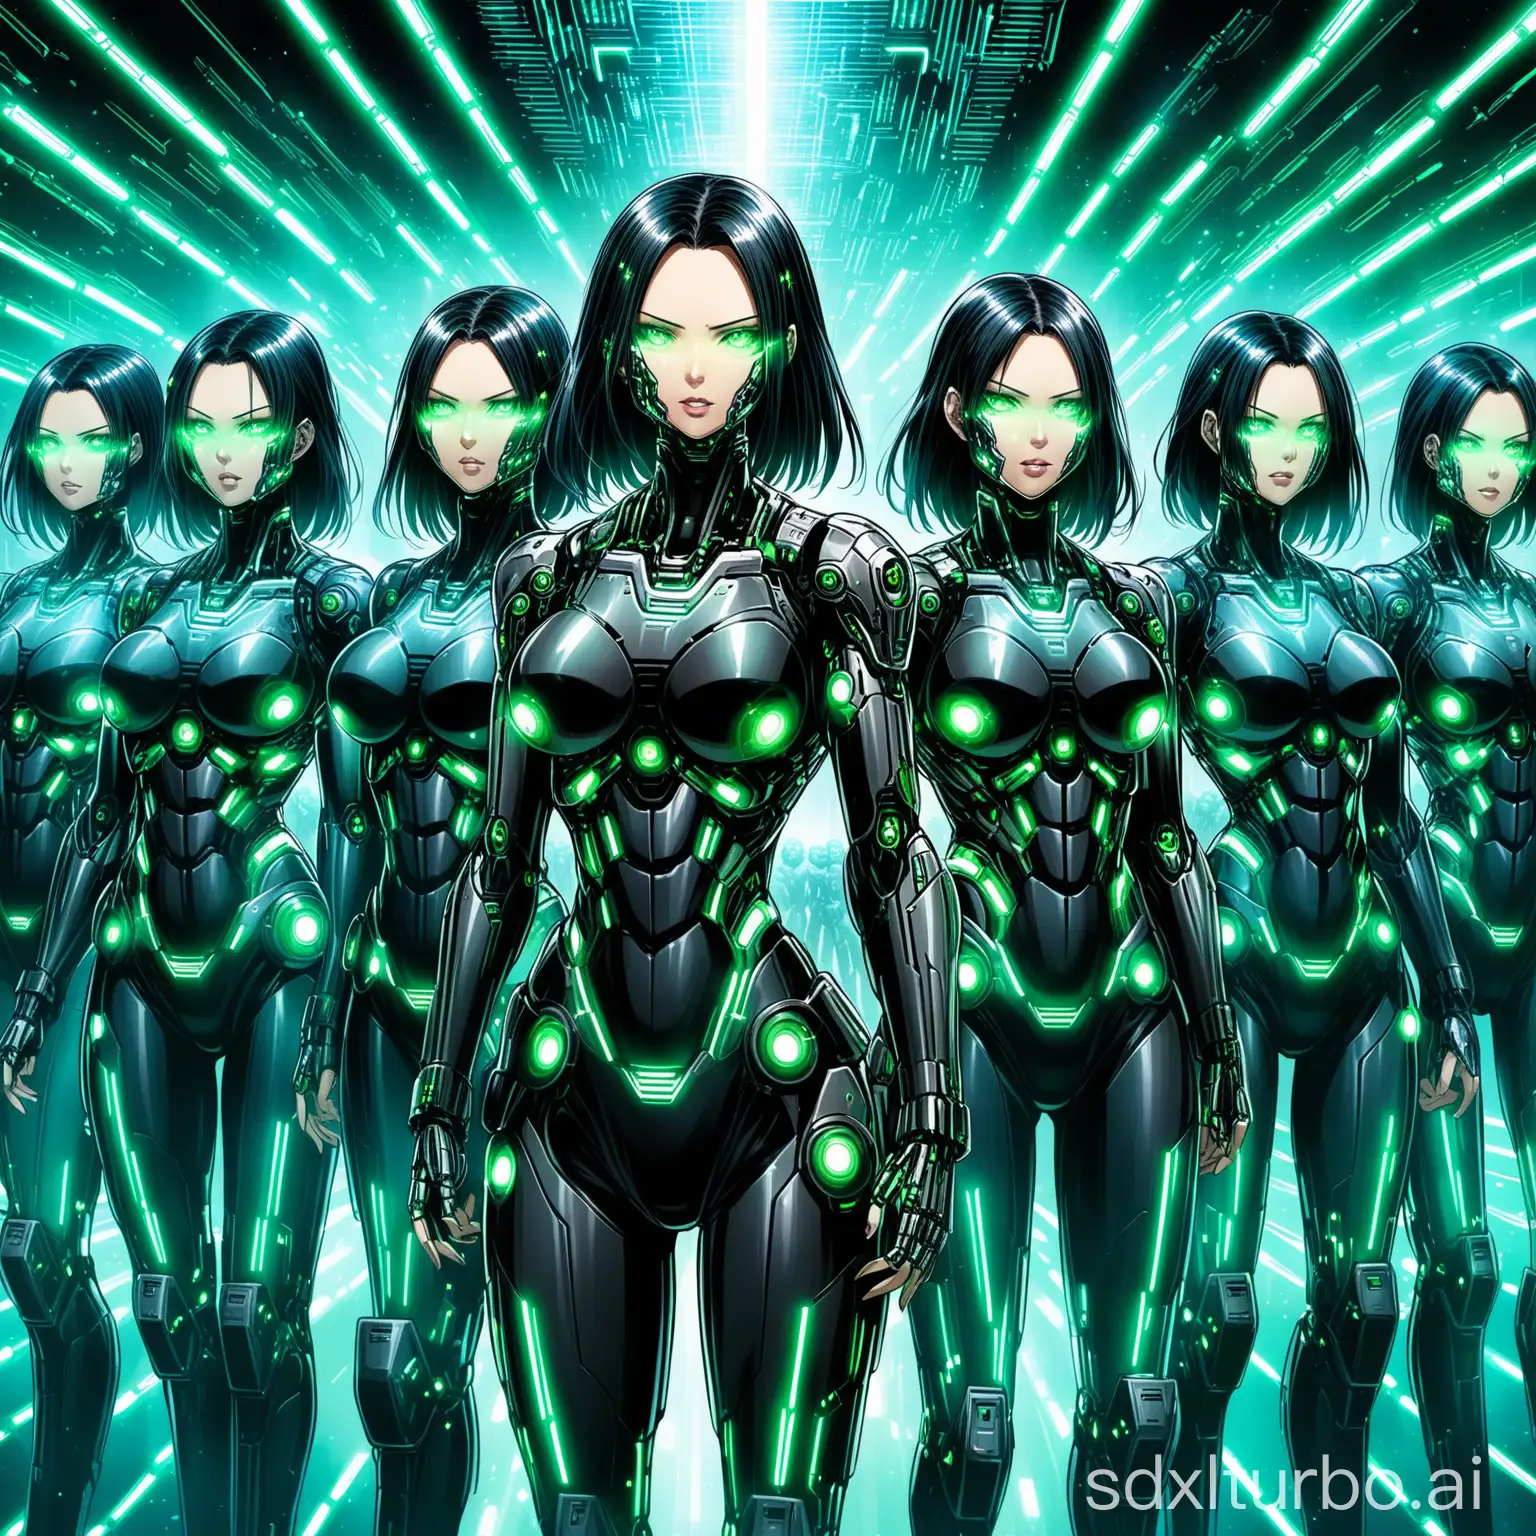 army of serious anime style borg girls, with cybernetic face implants, equipped with energy shields, combat against futuristic human soldiers